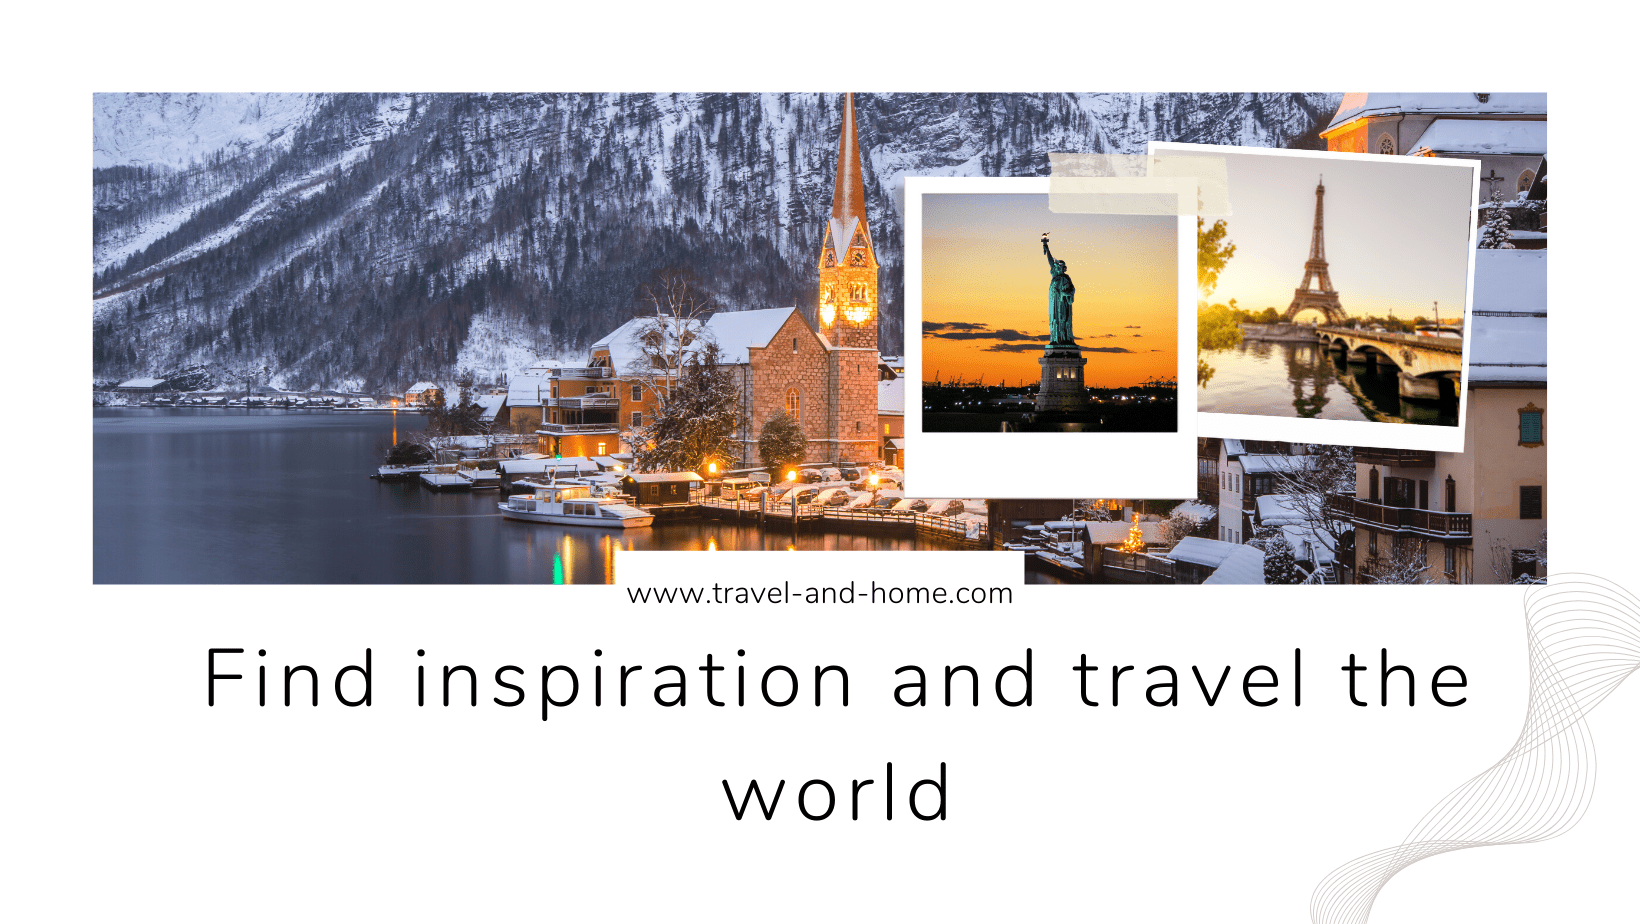 Find inspiration and travel the world